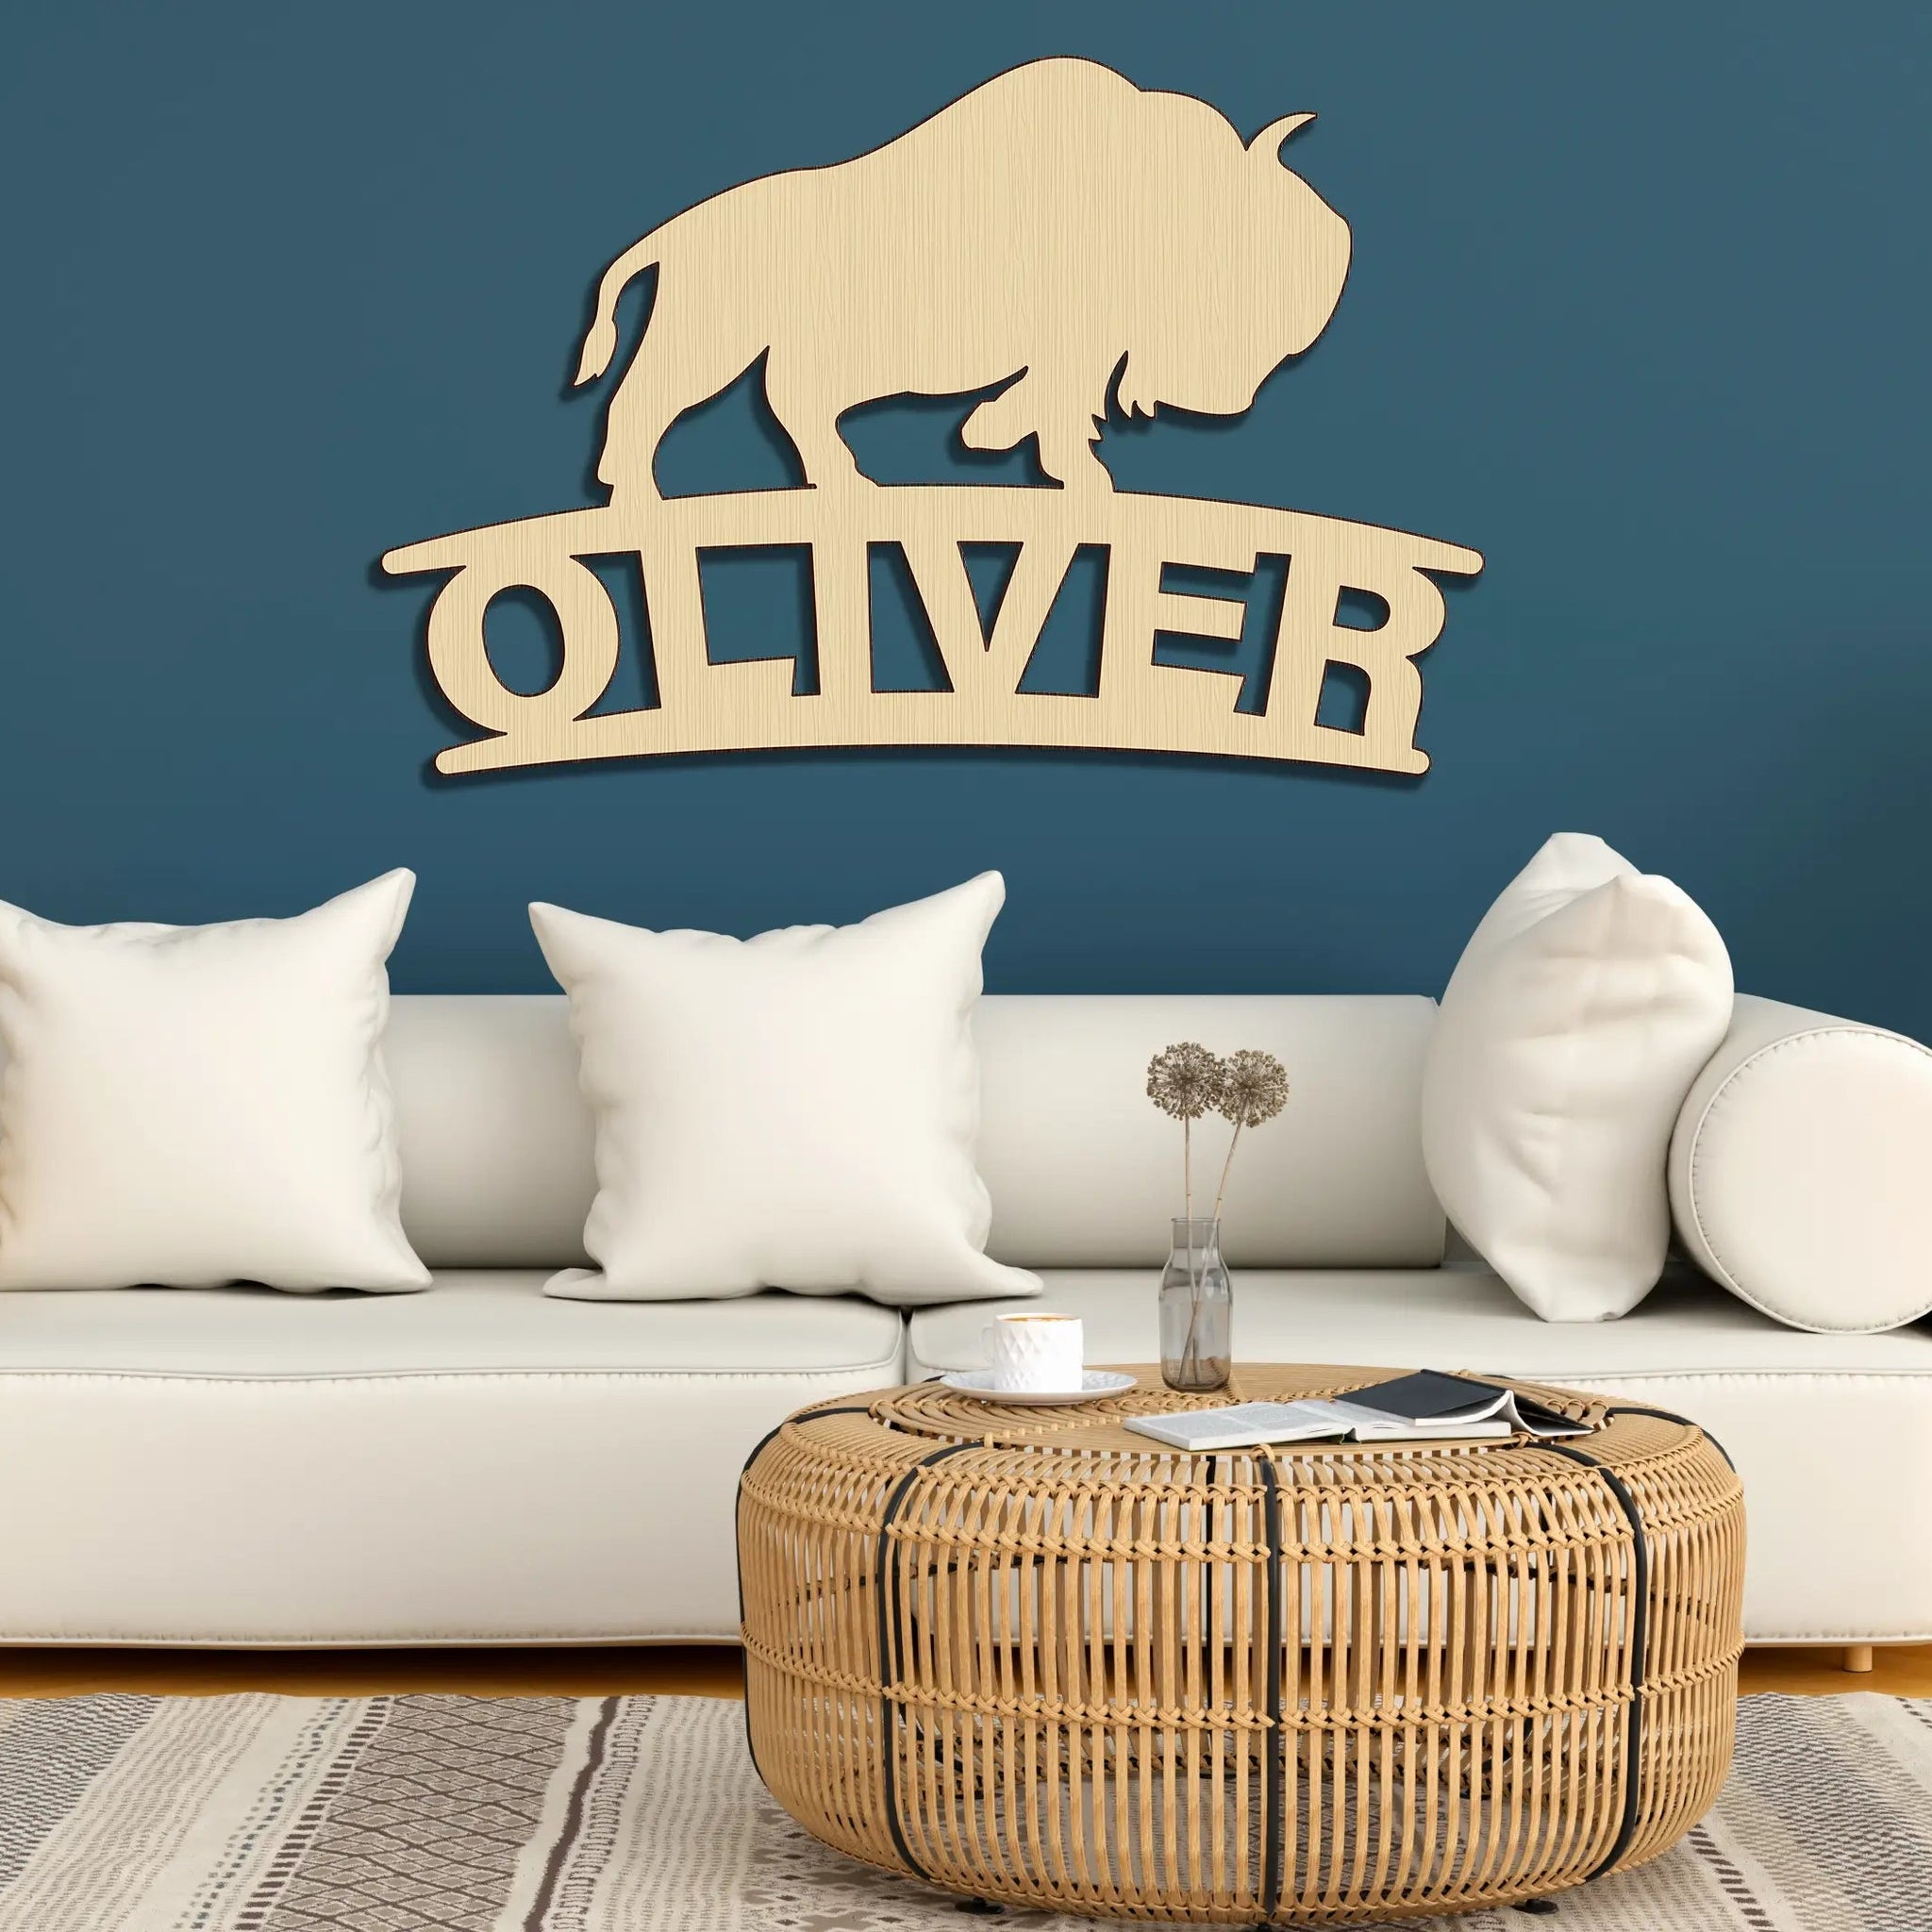 Custom Bison Bull Animal Farm Boy Wood Cutout Unpainted Name Raw Shape Sign Baby Shower Personalized Gift Wall Decor 1/5 thick - Print Star Group LLC